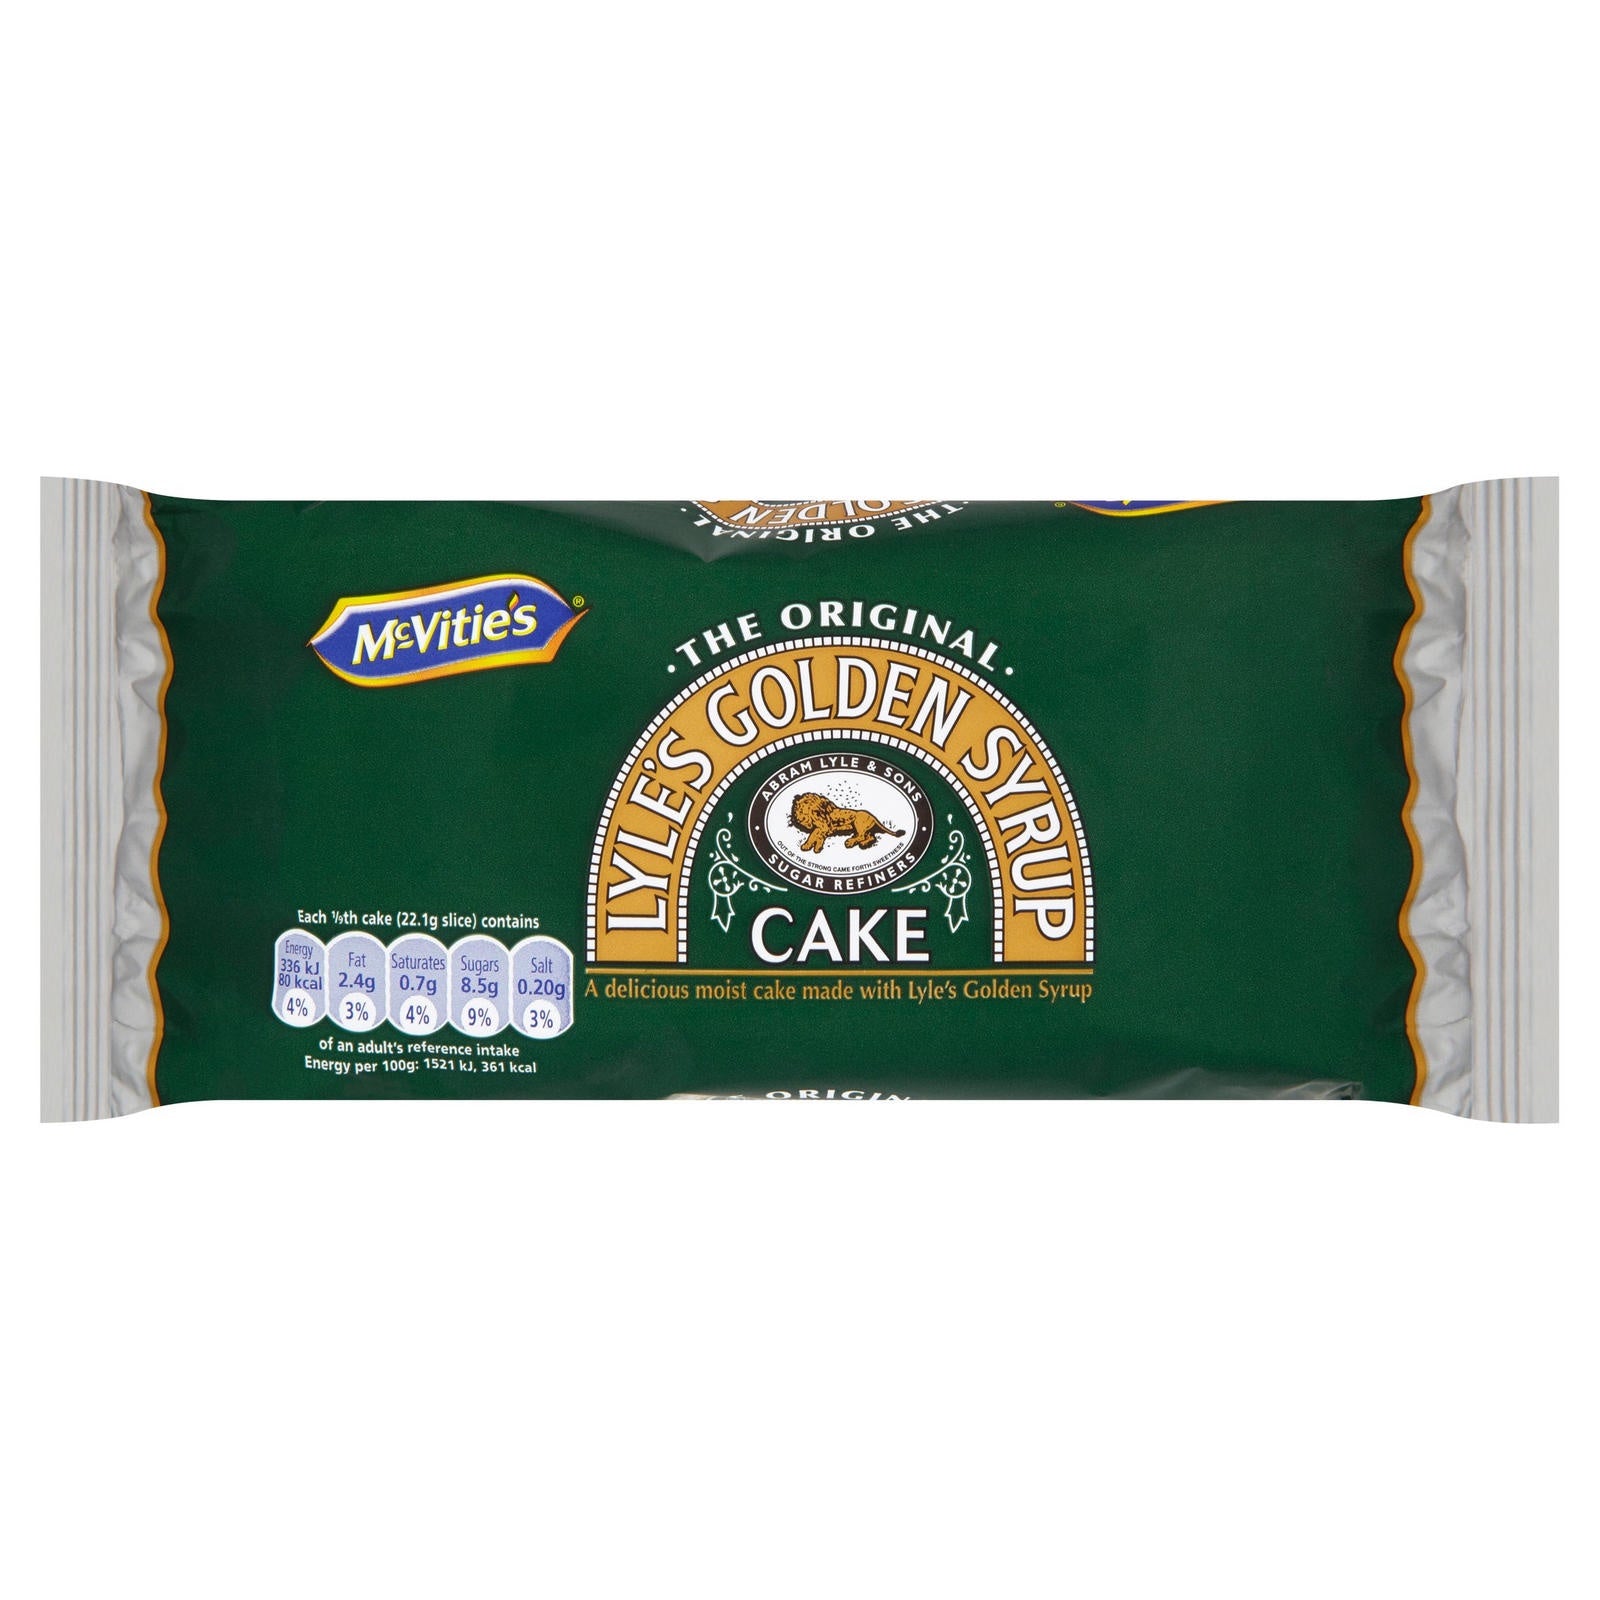 McVities Lyle's Golden Syrup Cake